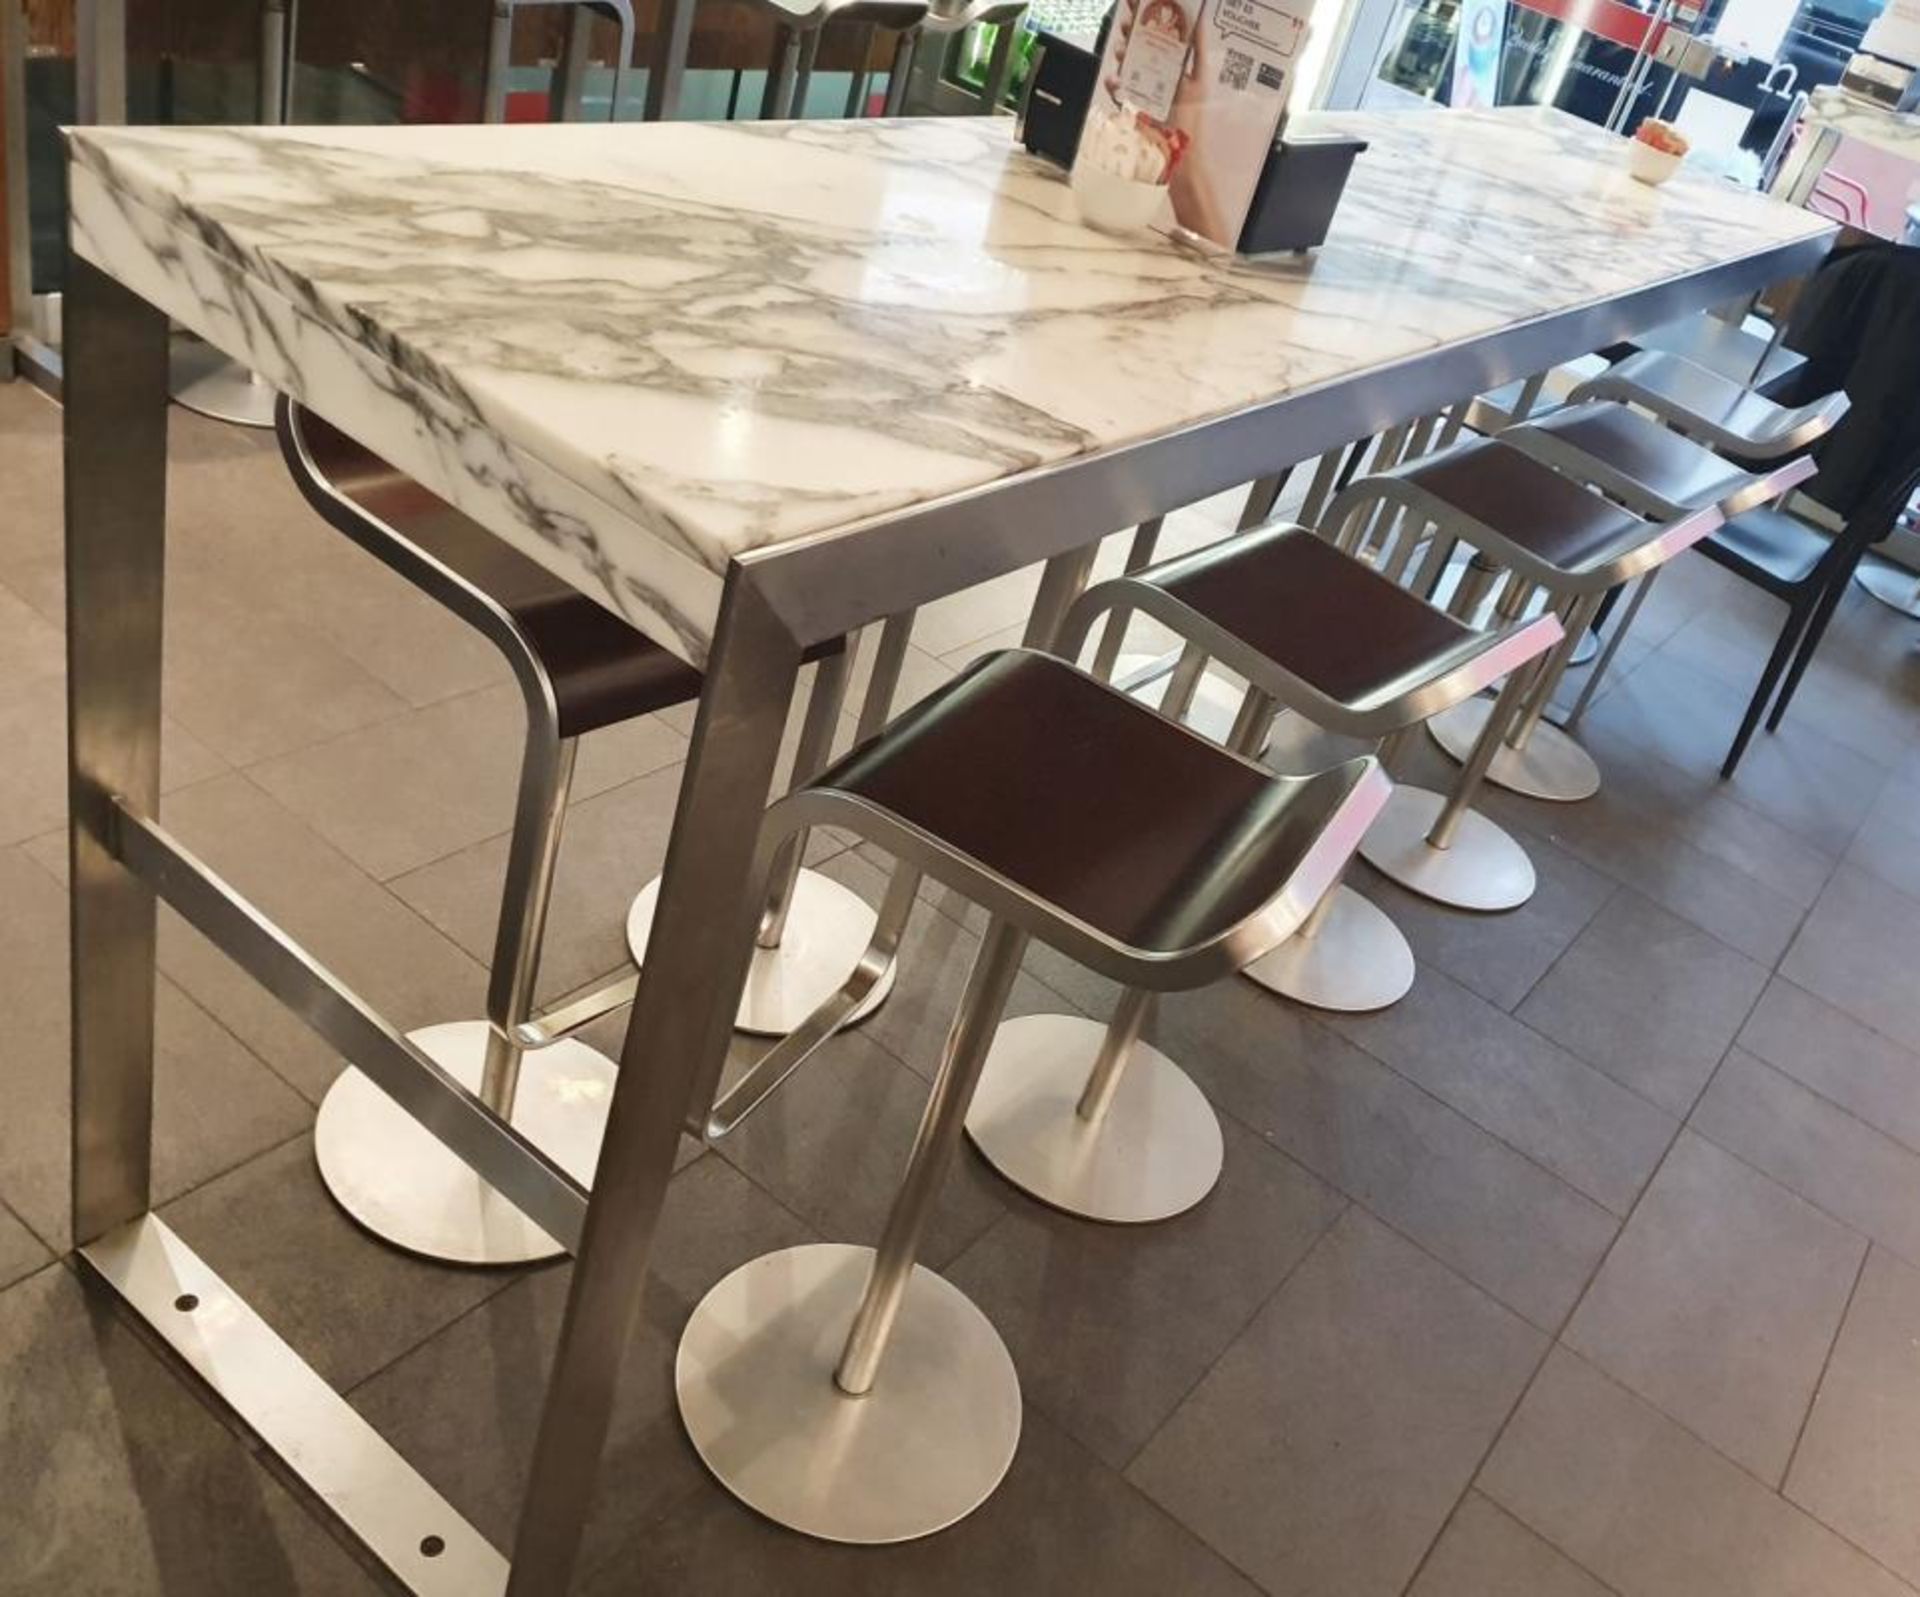 1 x White Marble/Granite Topped Cocktail Table - From A Milan-style City Centre Cafe - Image 4 of 7